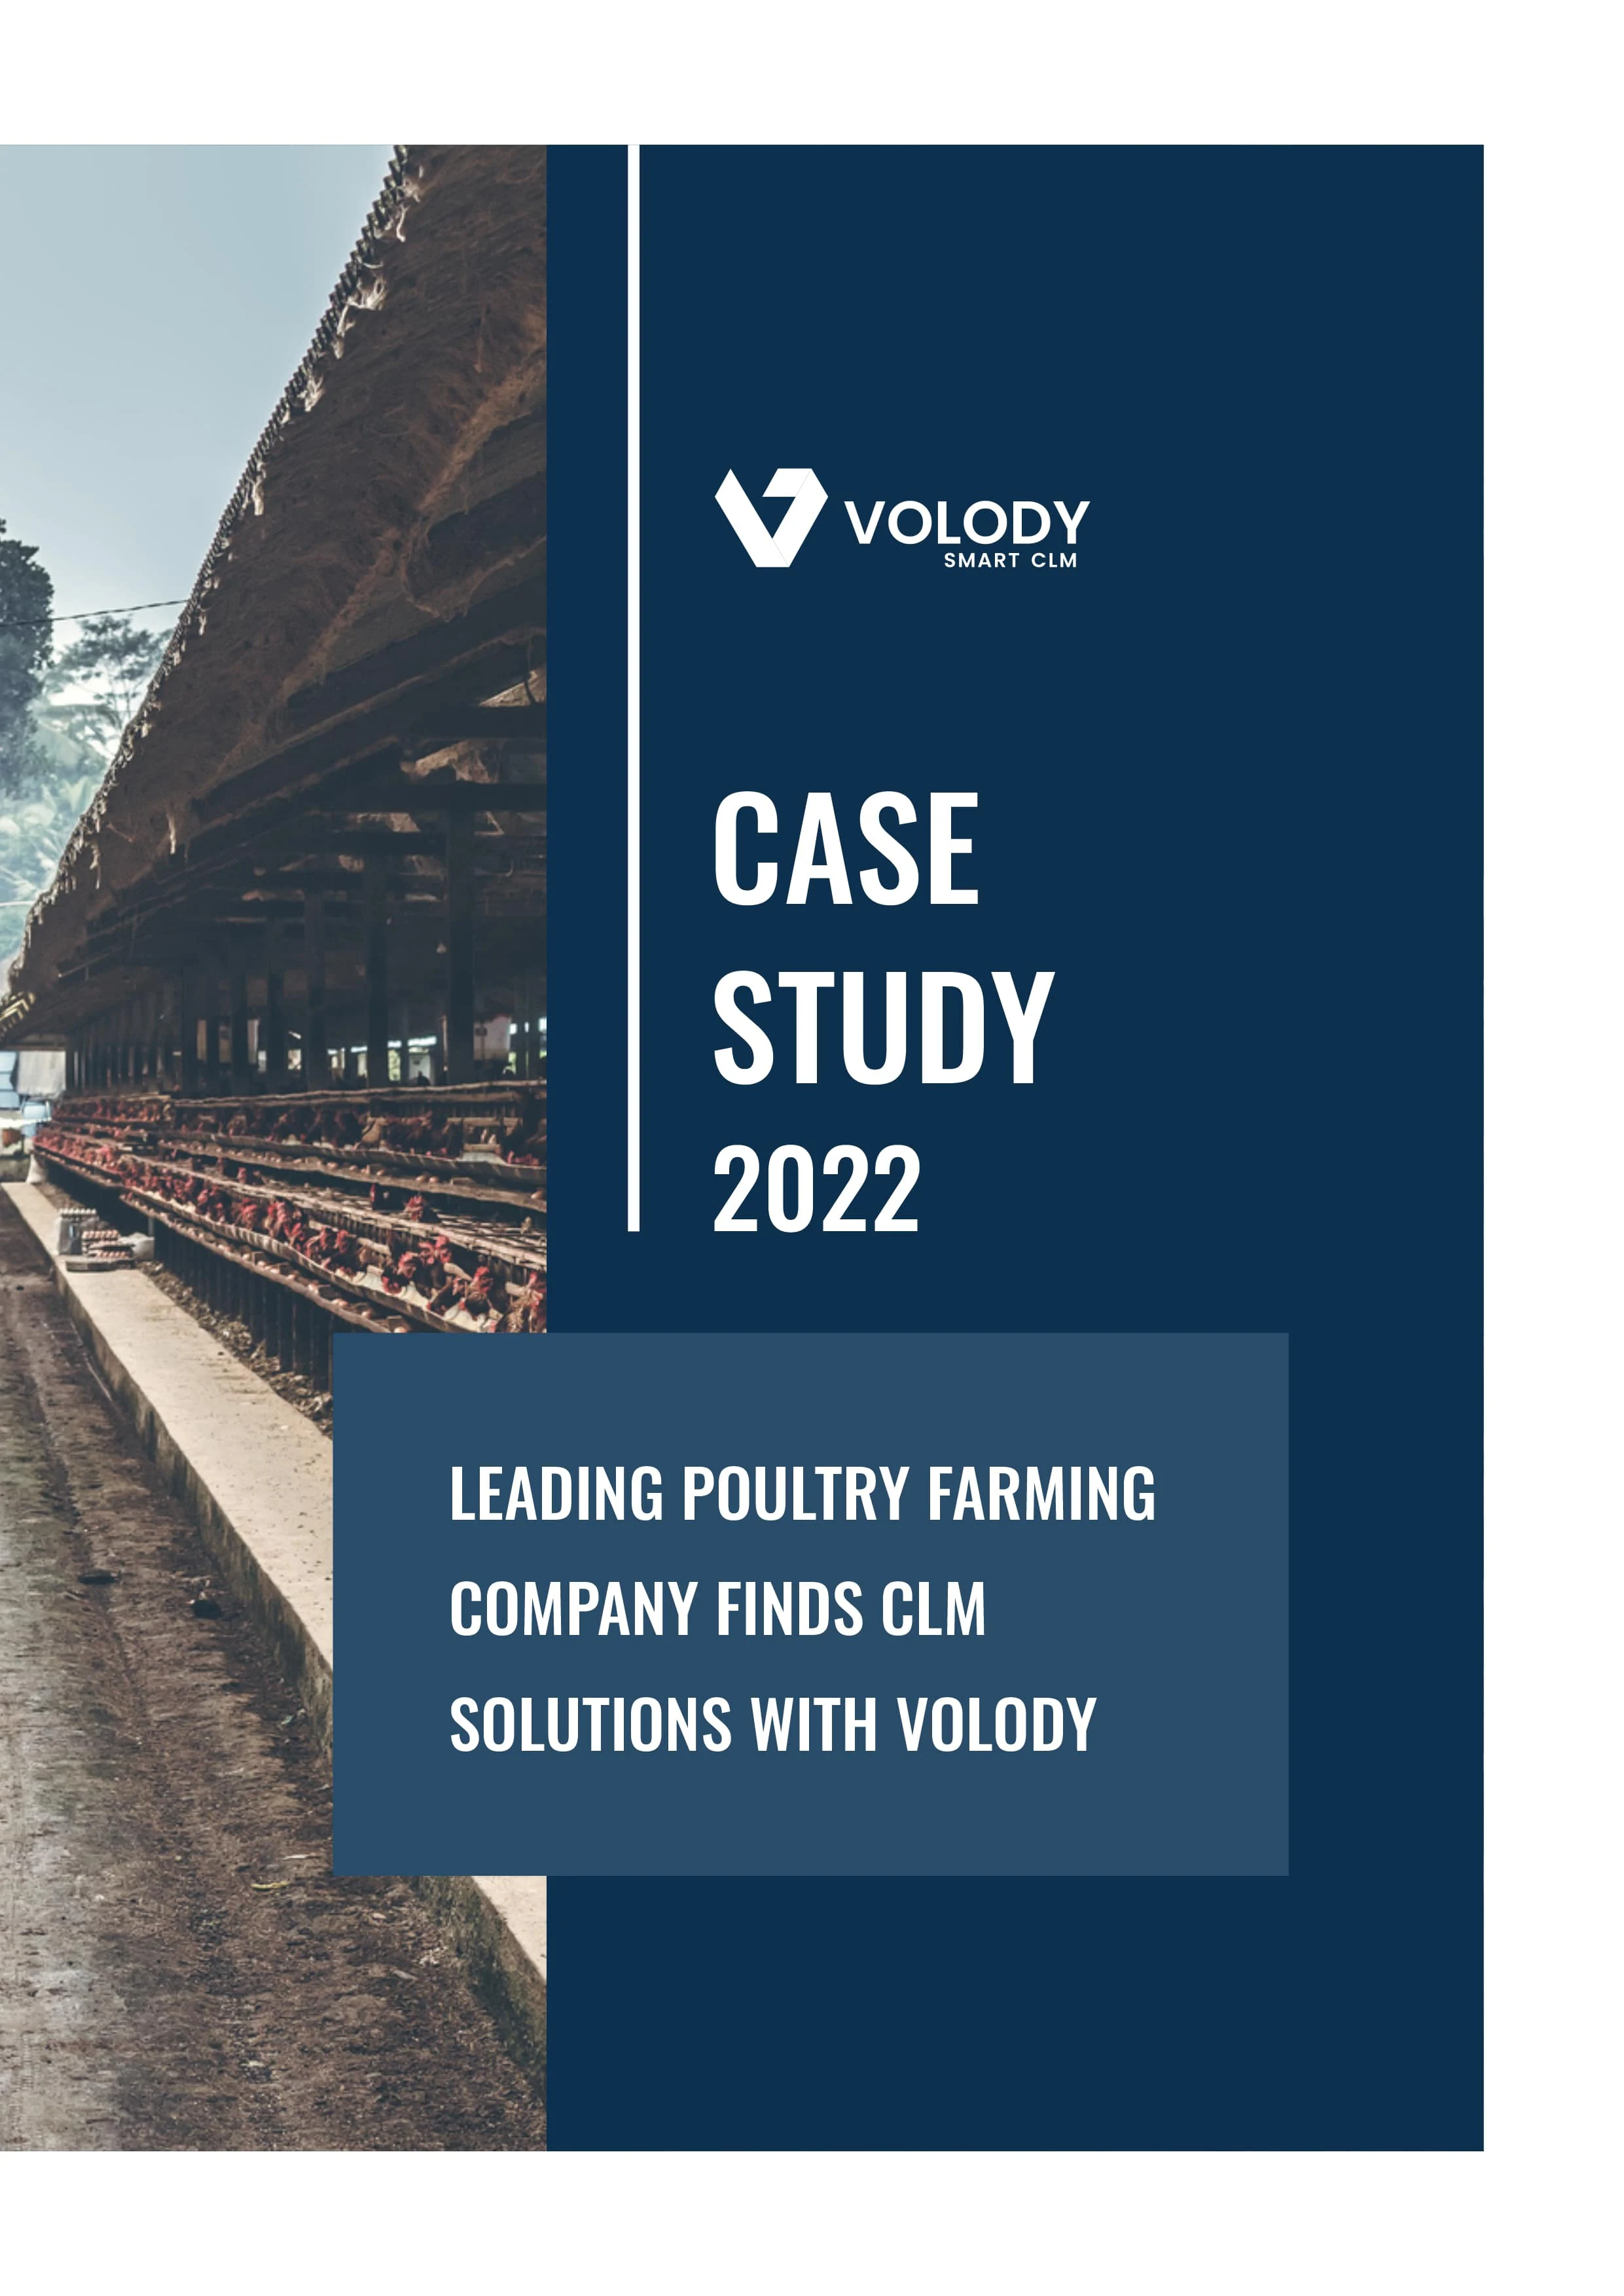 Leading poultry farming company finds clm solutions with volody